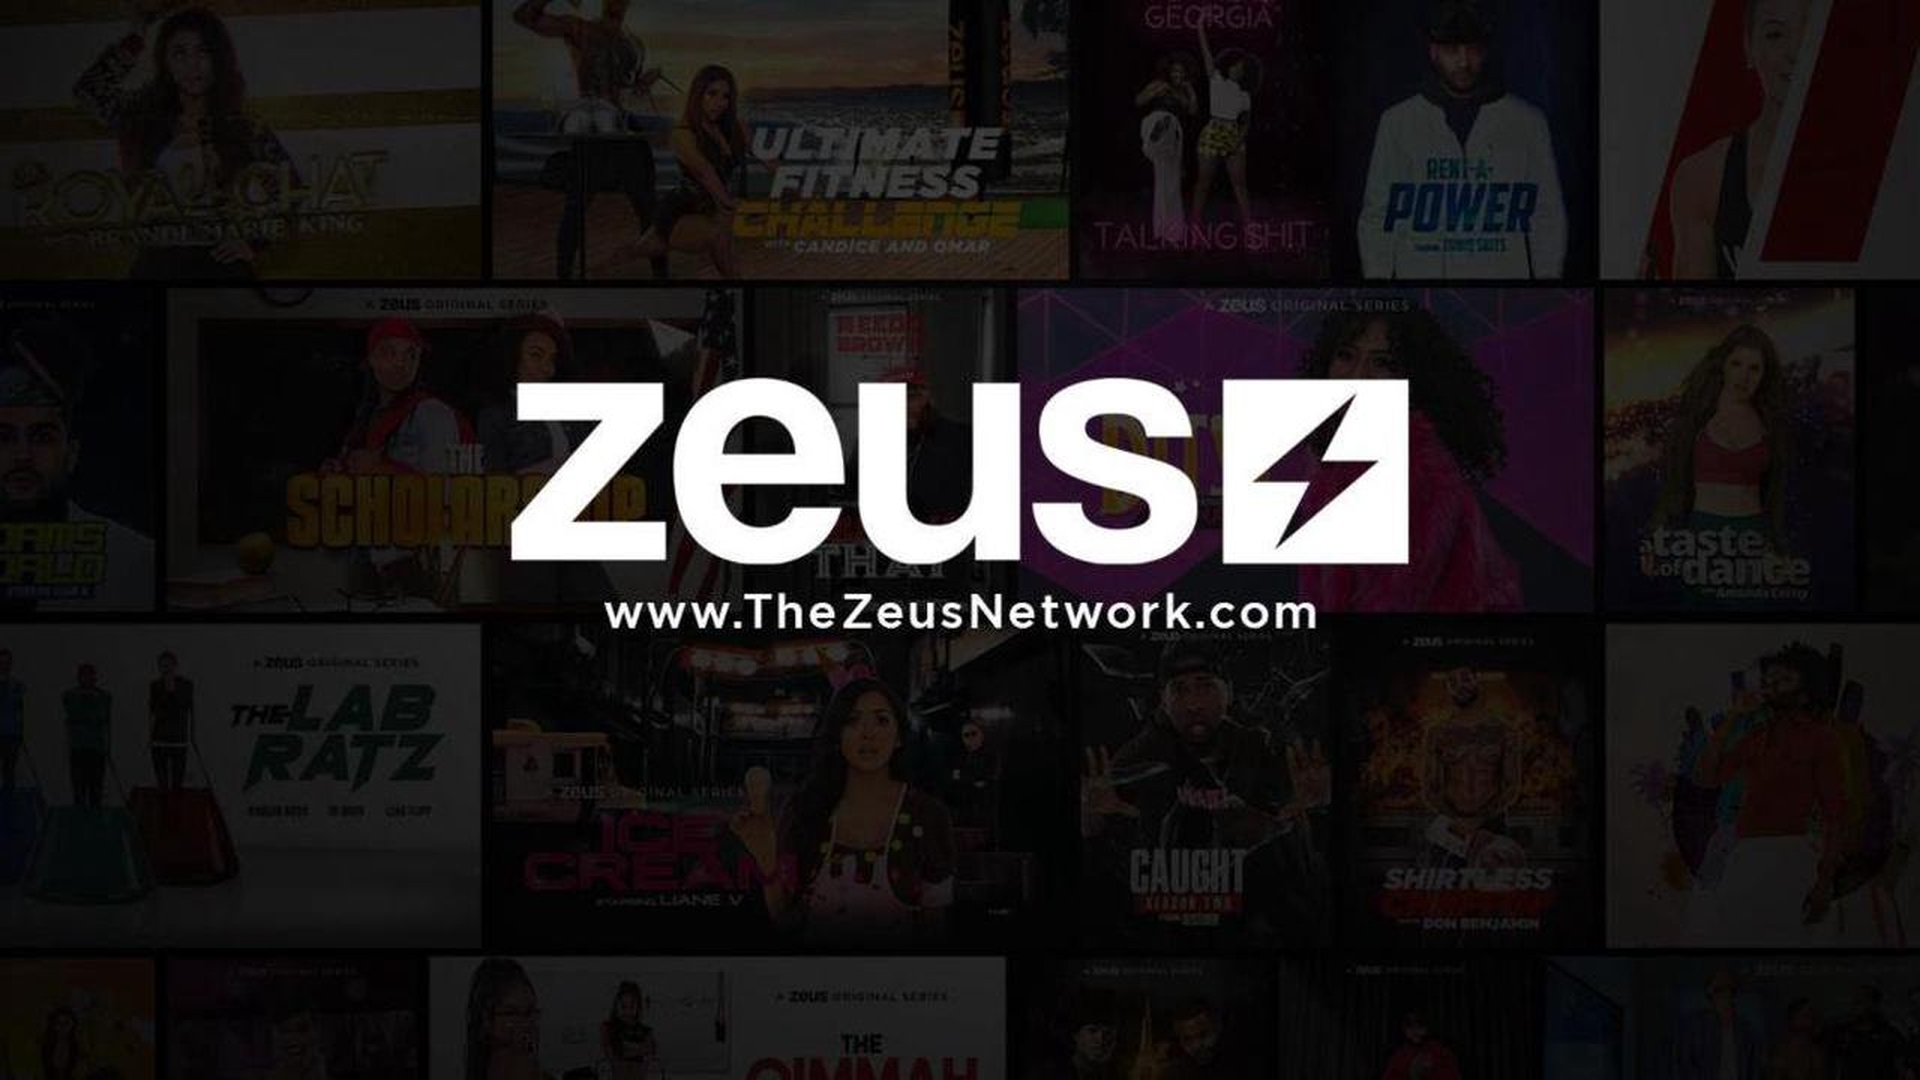 In this article, we are going to be covering TheZeusNetwork/activate: How to activate Zeus Network, so you can enjoy this streaming service on any device.